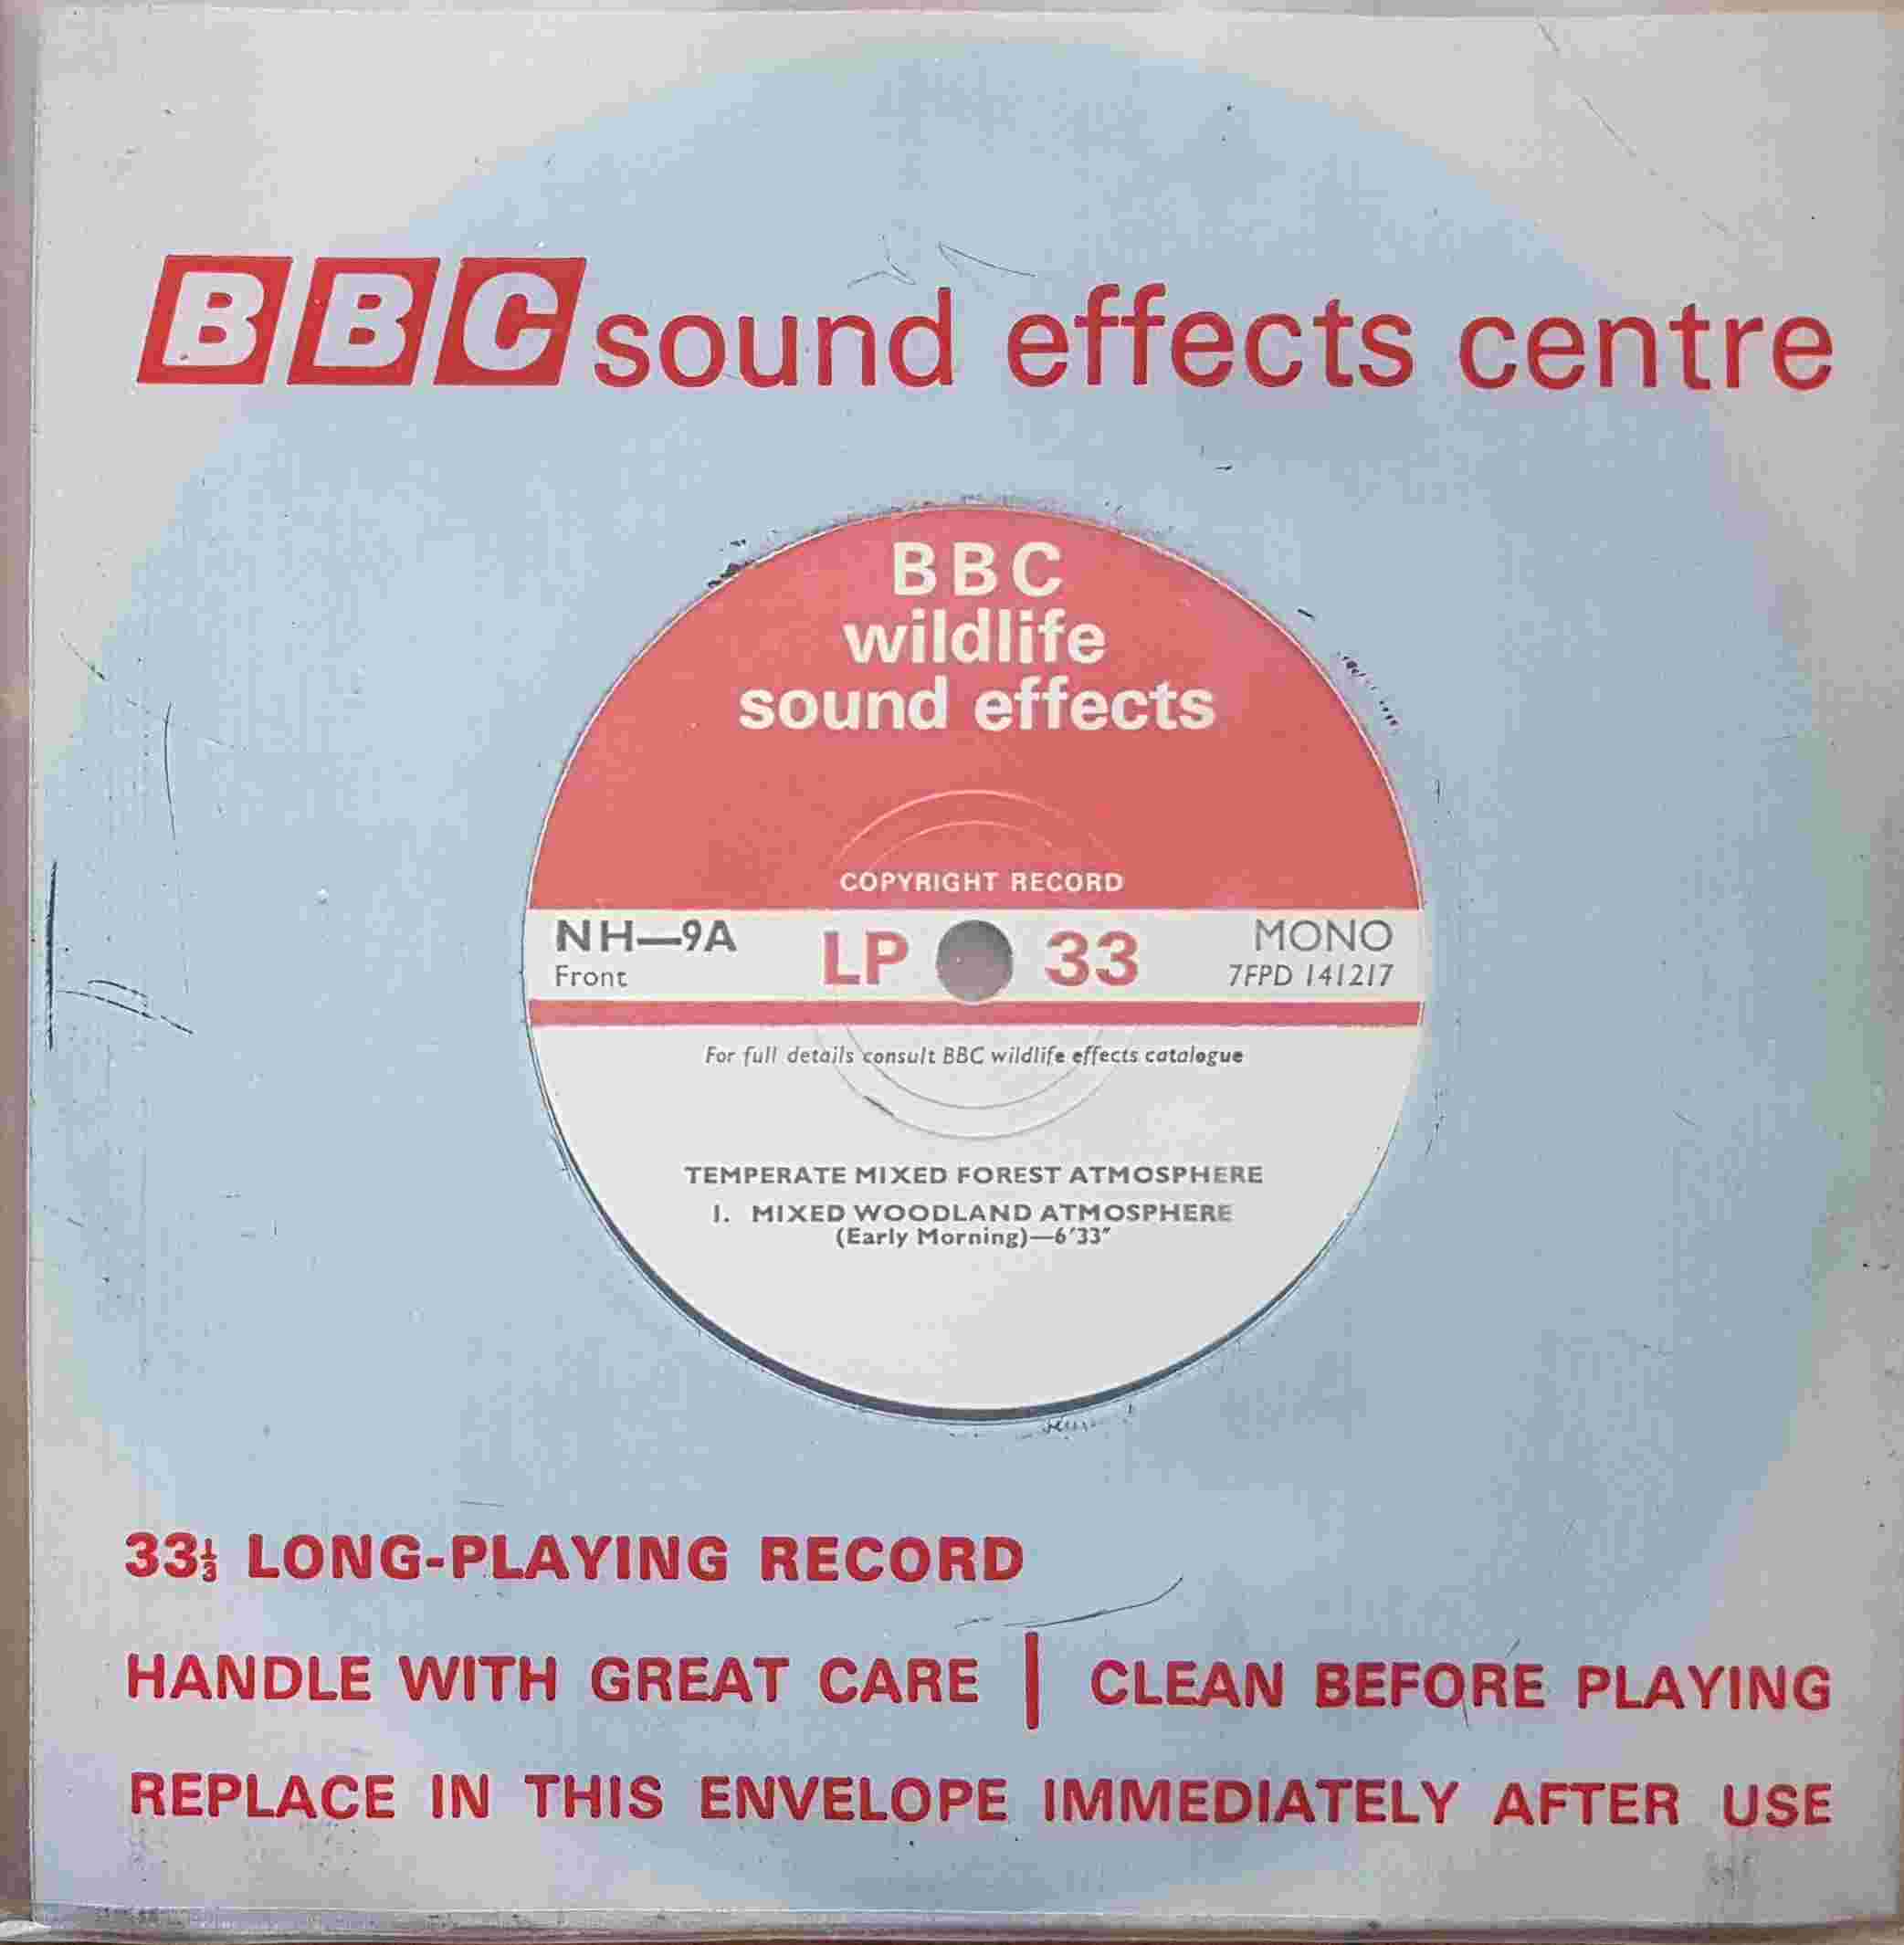 Picture of Temperature mixed forest atmosphere by artist Not registered from the BBC singles - Records and Tapes library